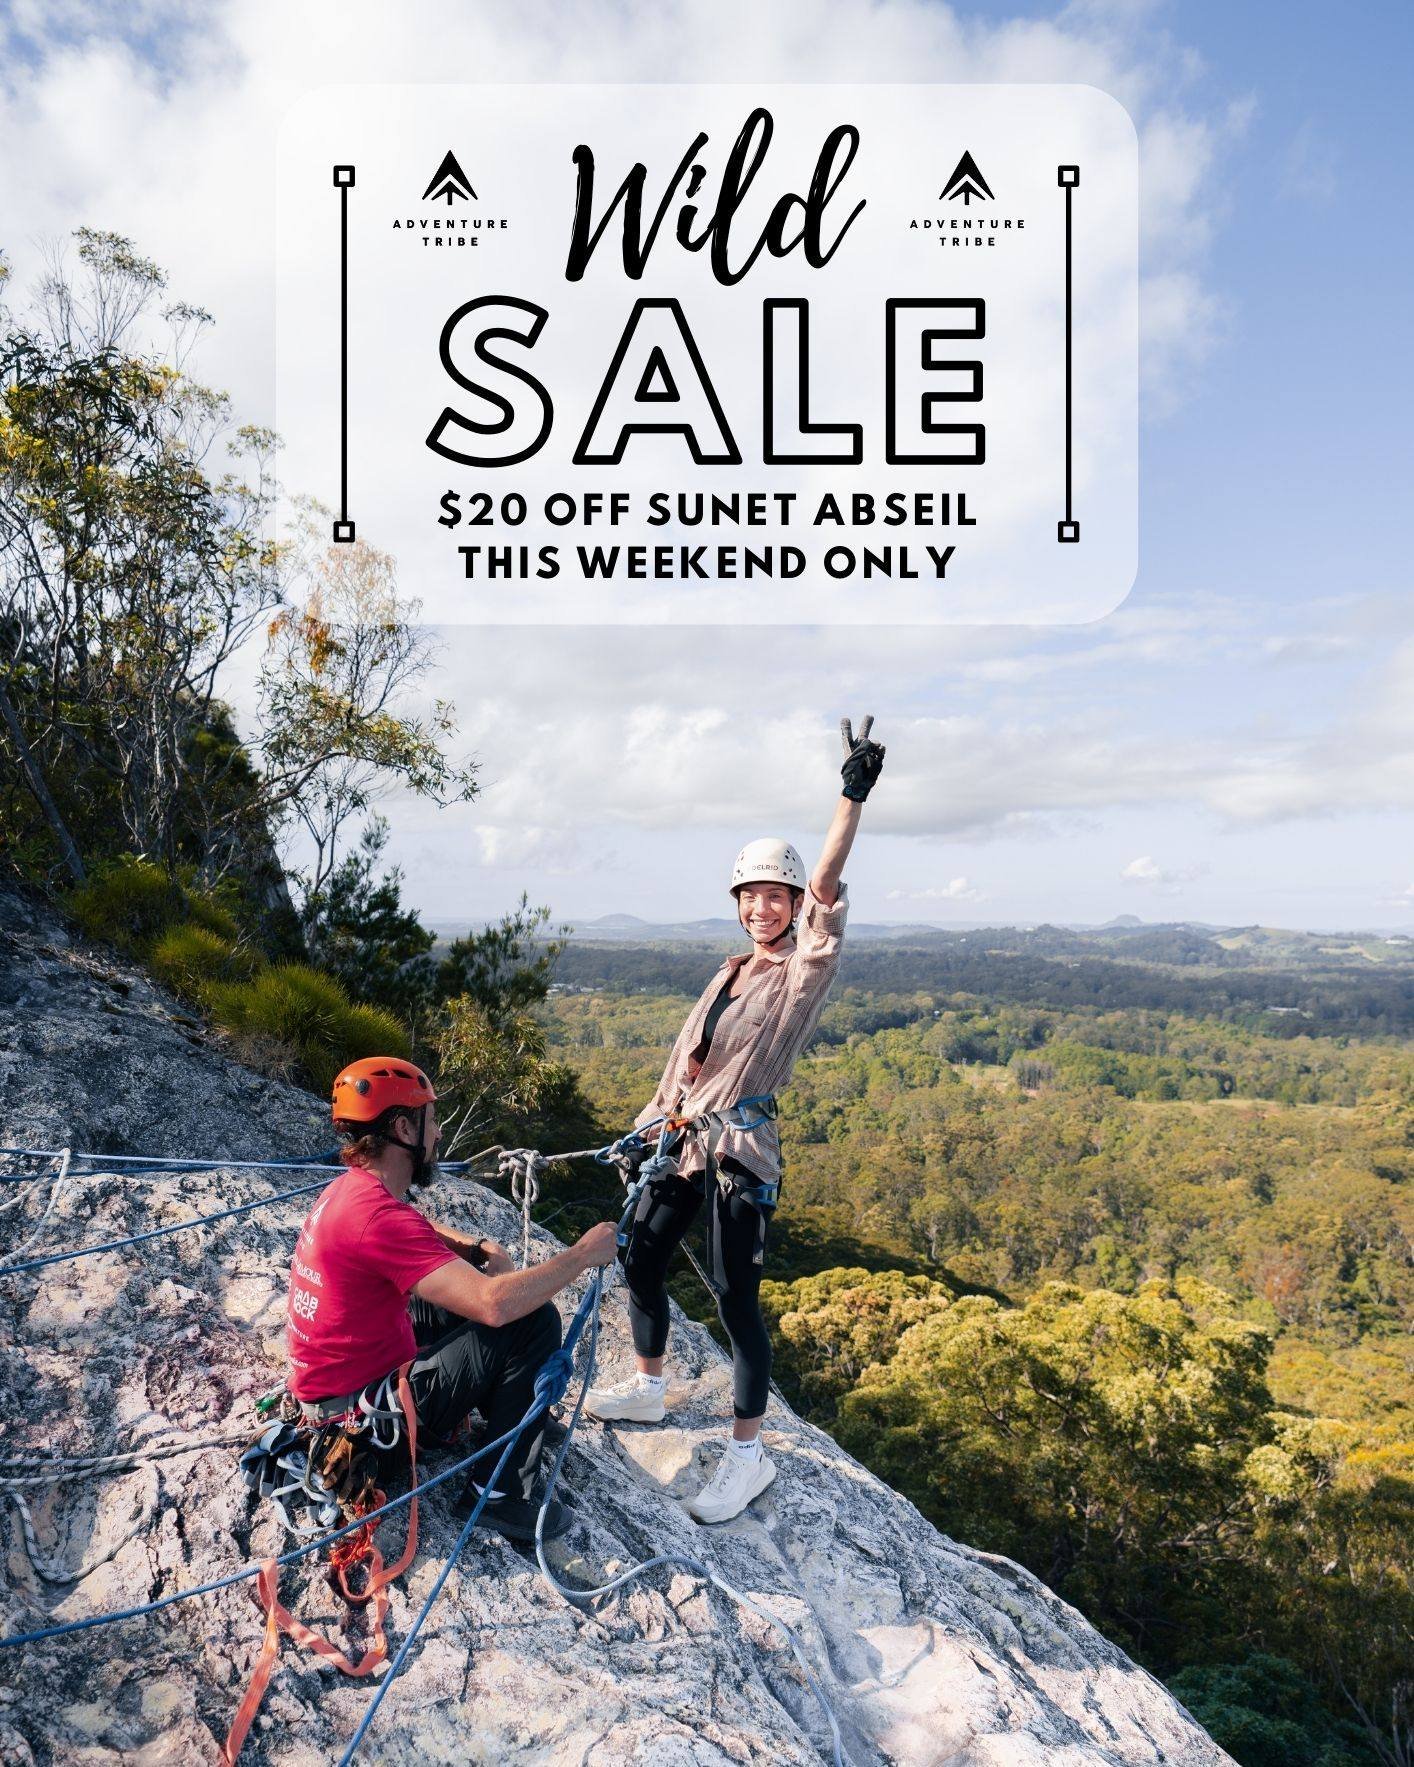 Don't miss out on our exclusive offer! Get $20 off our breathtaking sunset abseil tour, Saturday 17th only! Experience the thrill of descending down cliffs as the sun sets in the background. Limited spots available, head to the website to book! www.o